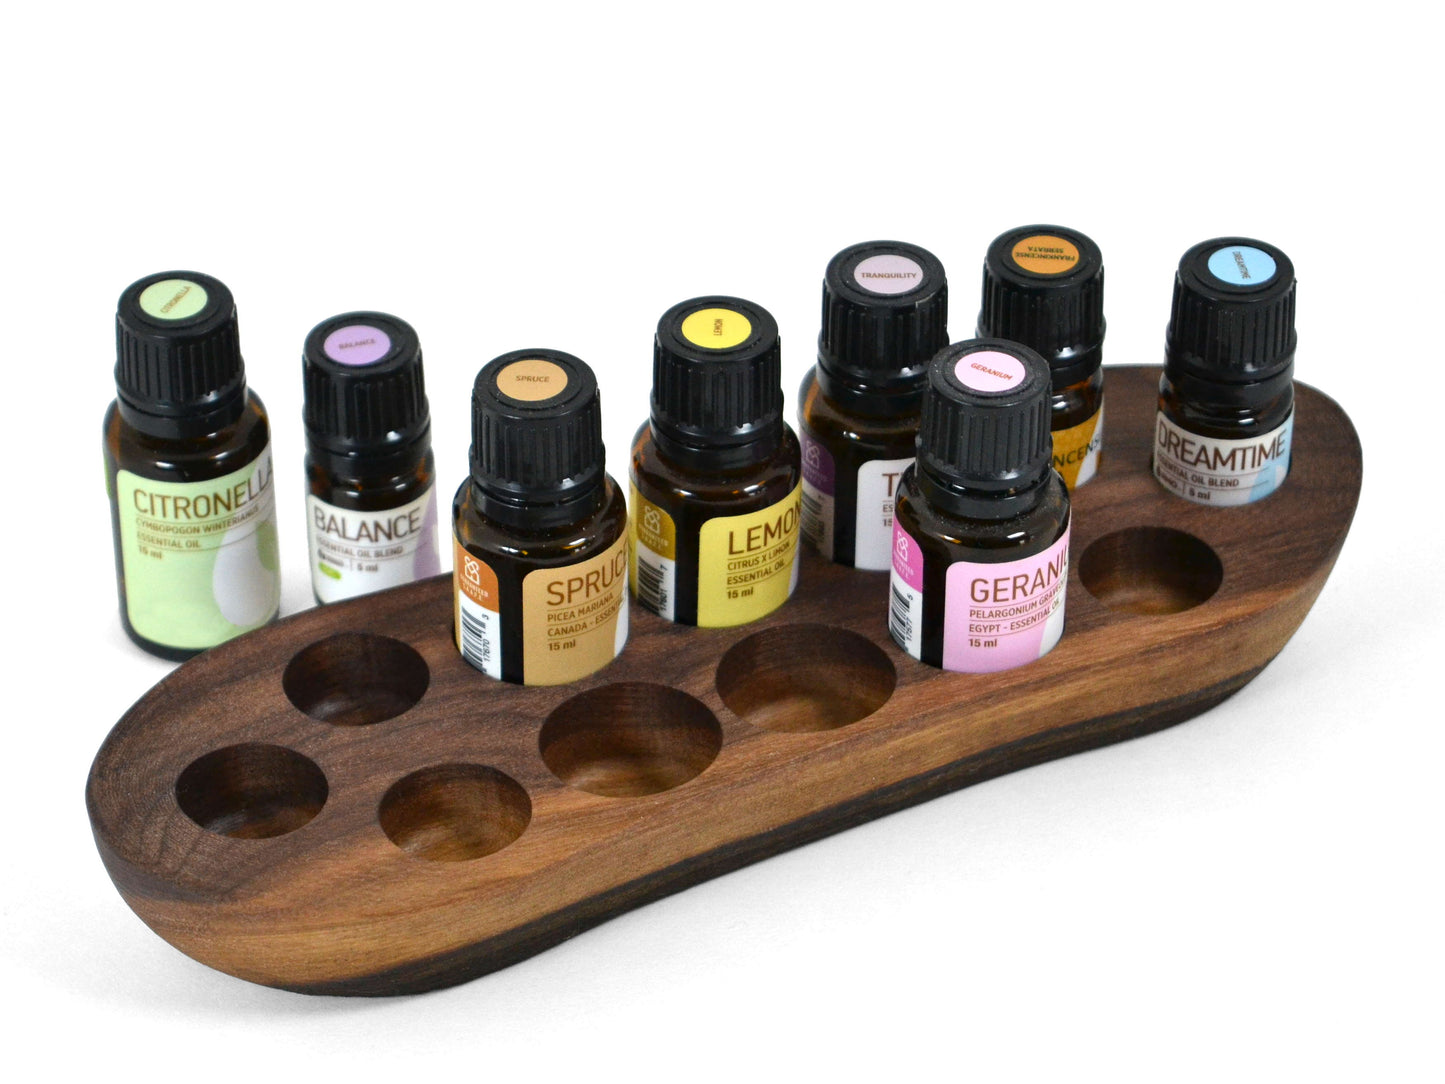 5mL and 15mL oil bottles fit into our walnut display holder